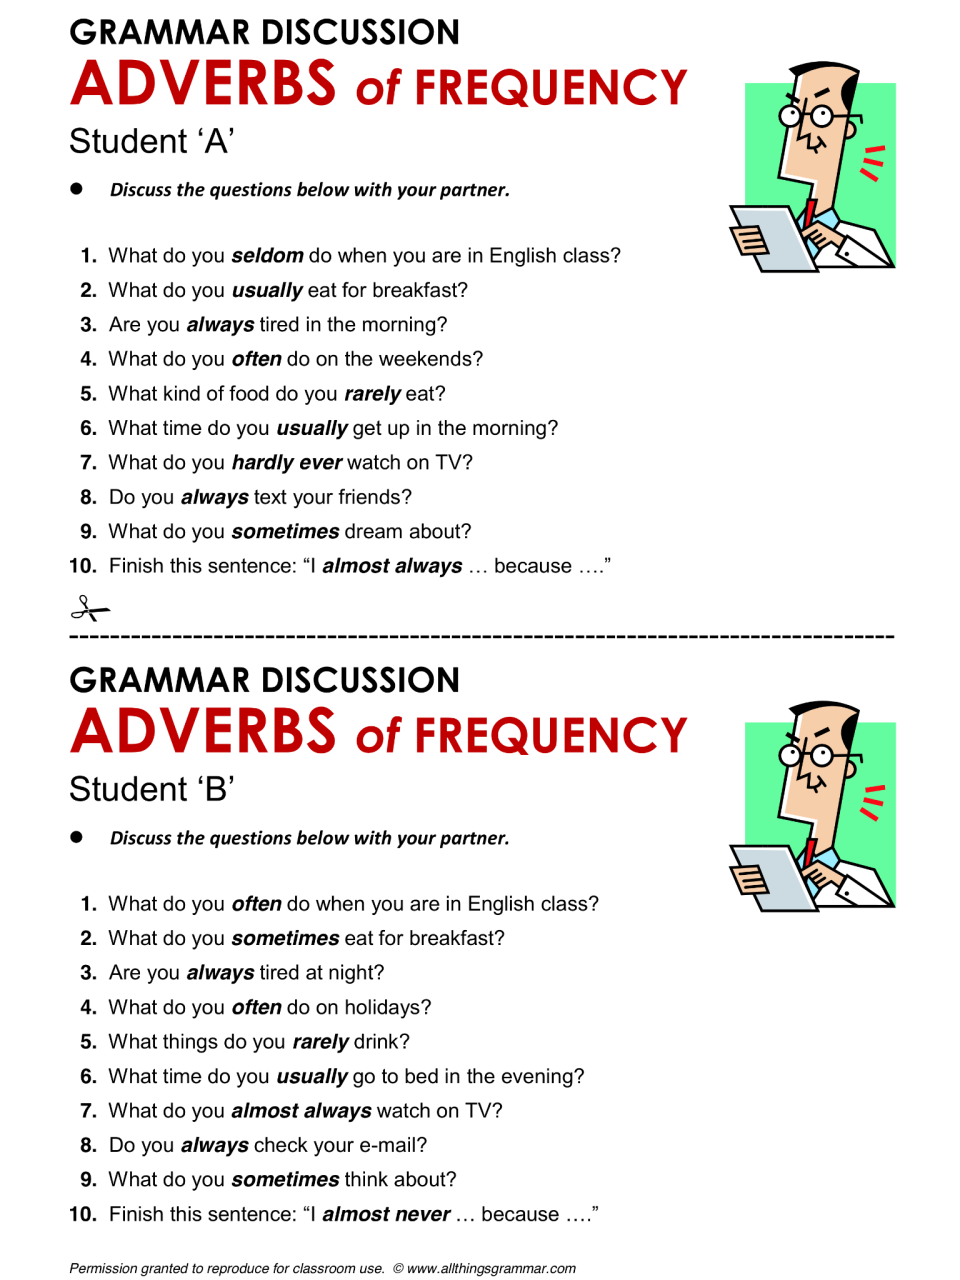 Adverbs Of Frequency Worksheets